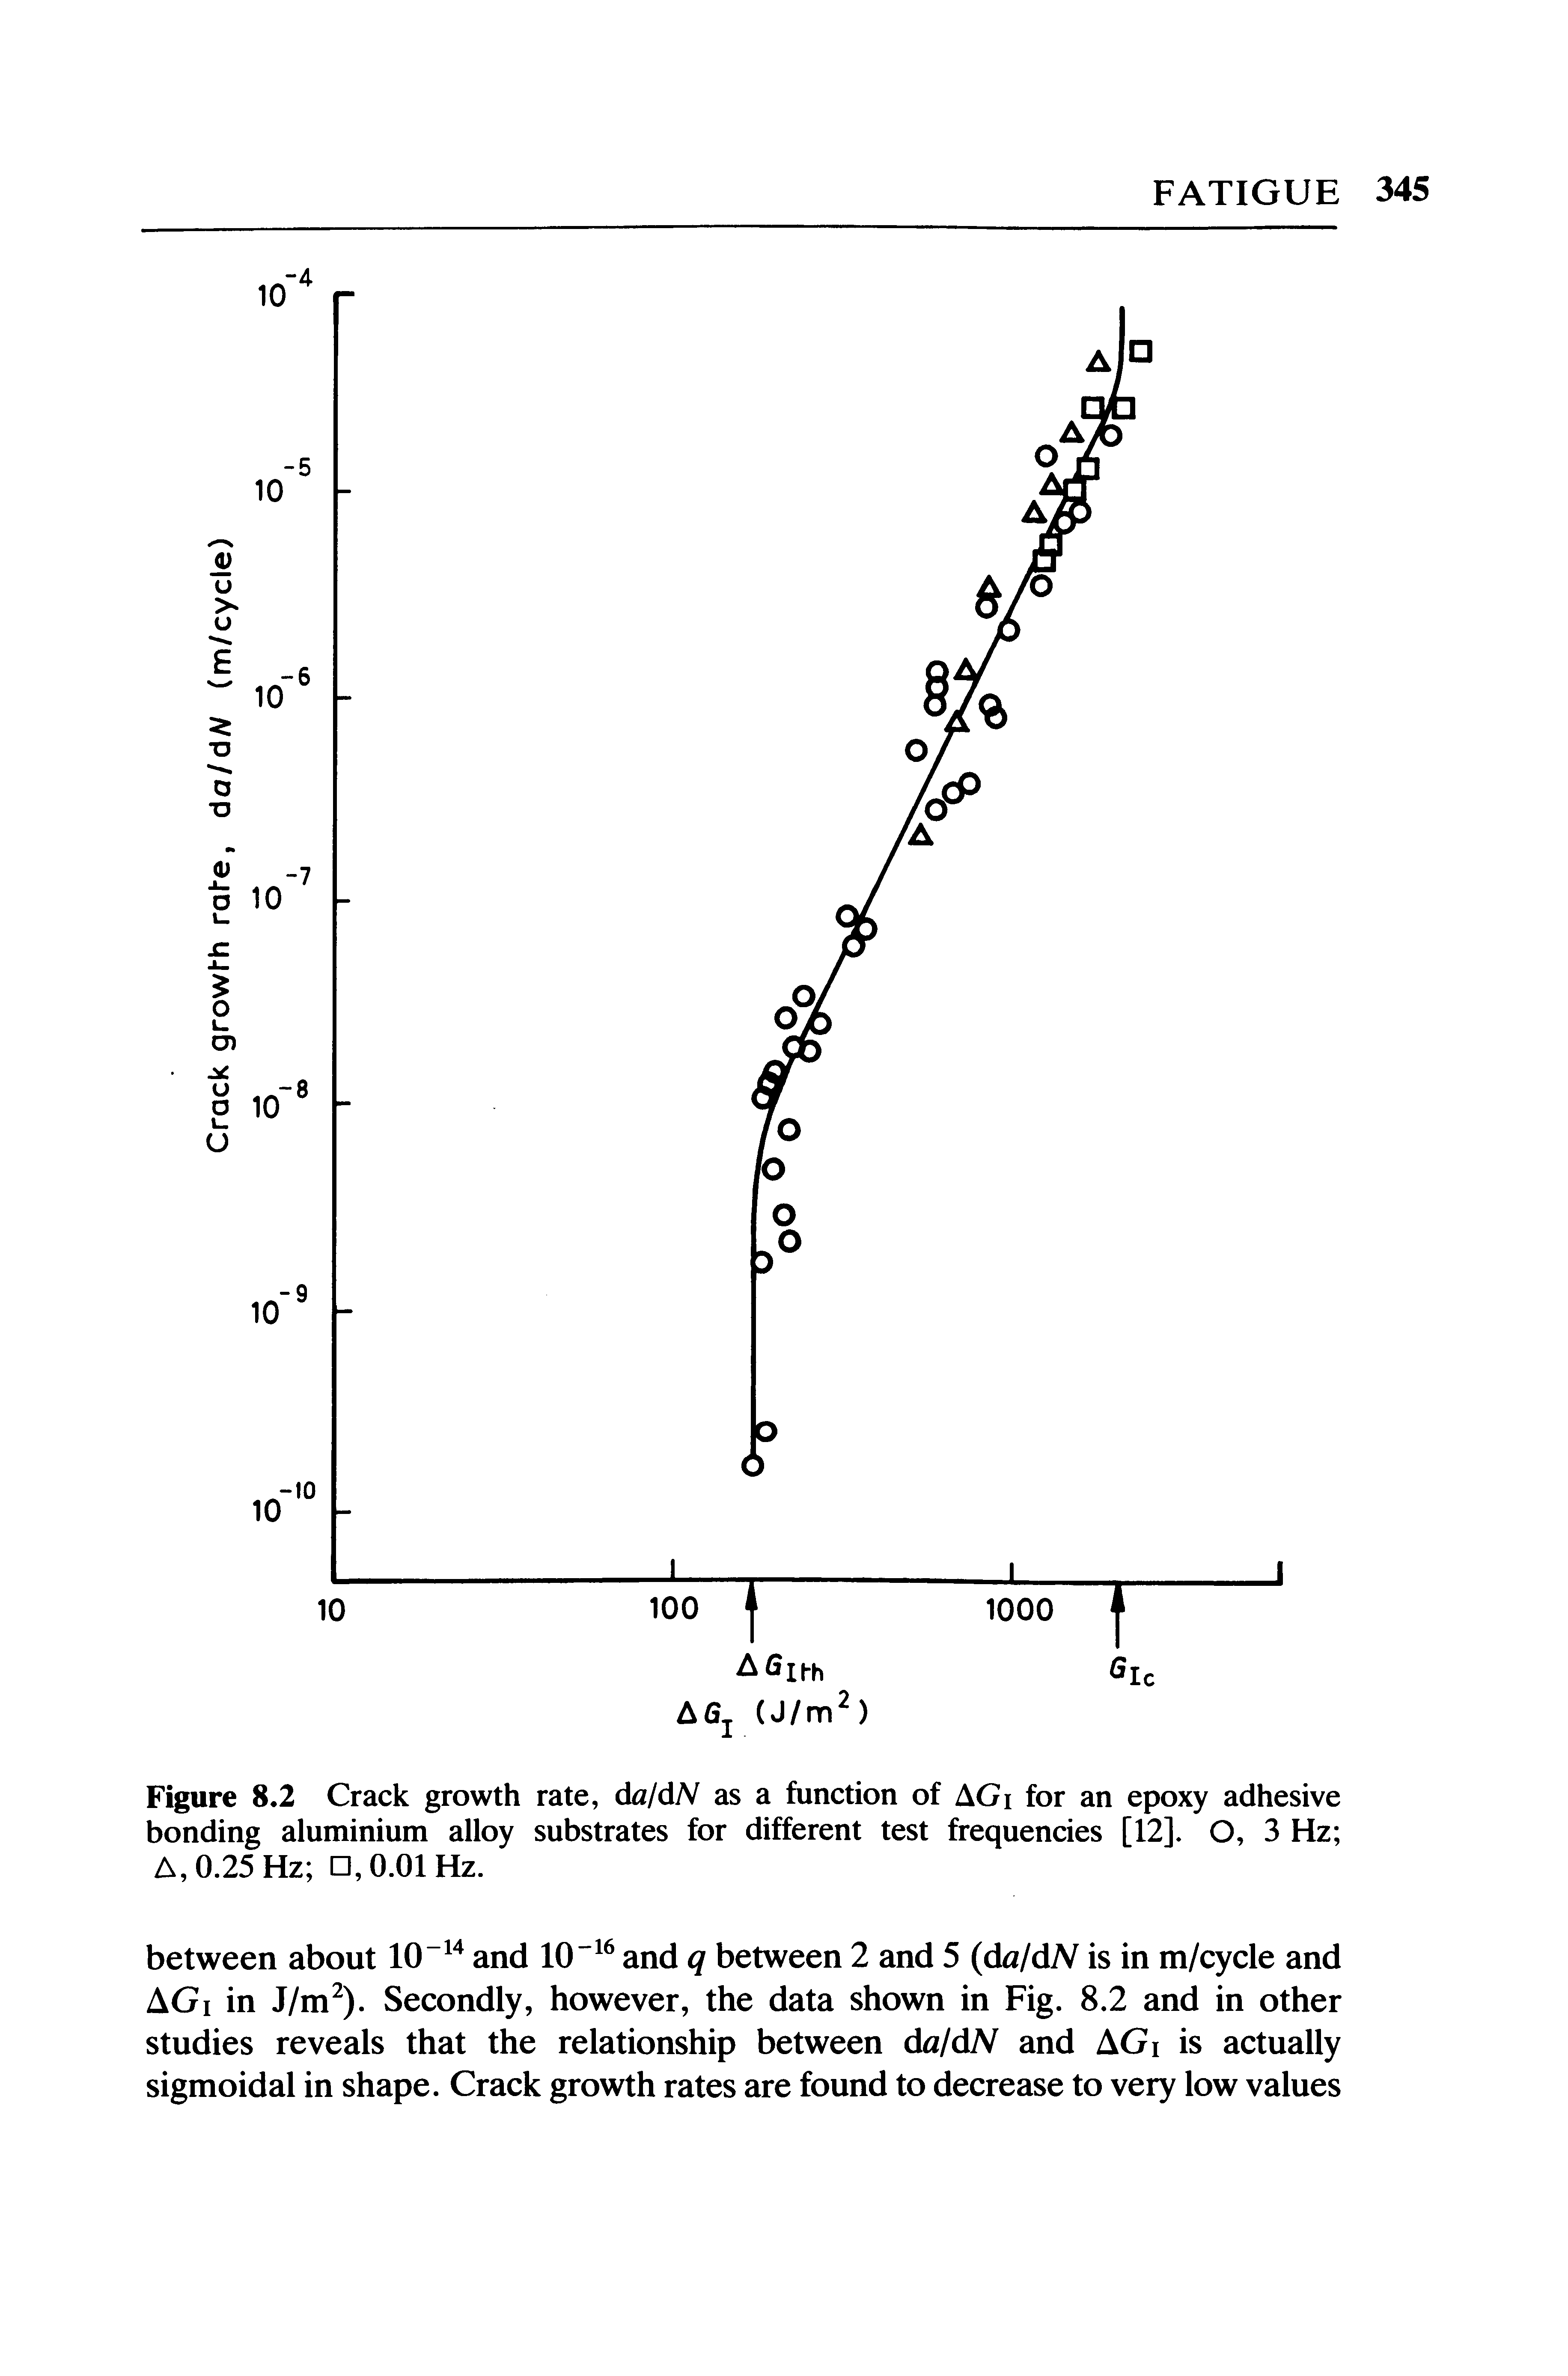 Figure 8.2 Crack growth rate, da/dN as a function of AGi for an epoxy adhesive bonding aluminium alloy substrates for different test frequencies [12]. O, 3 Hz A, 0.25 Hz 0,0.01 Hz.